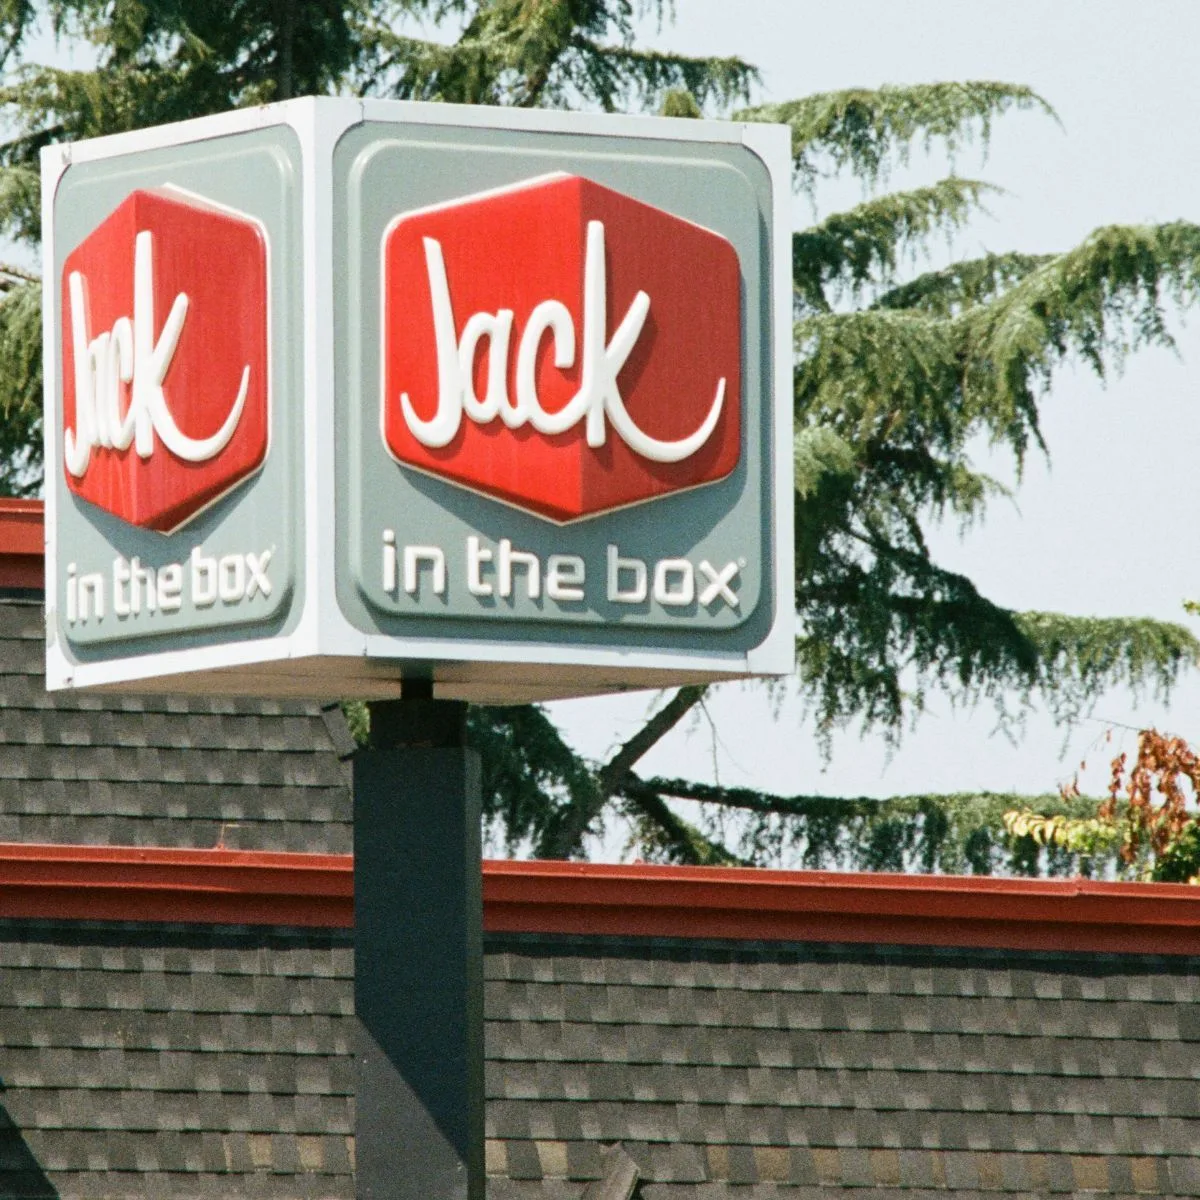 Why did Jack in the Box discontinue Potato Wedges and cause an uproar